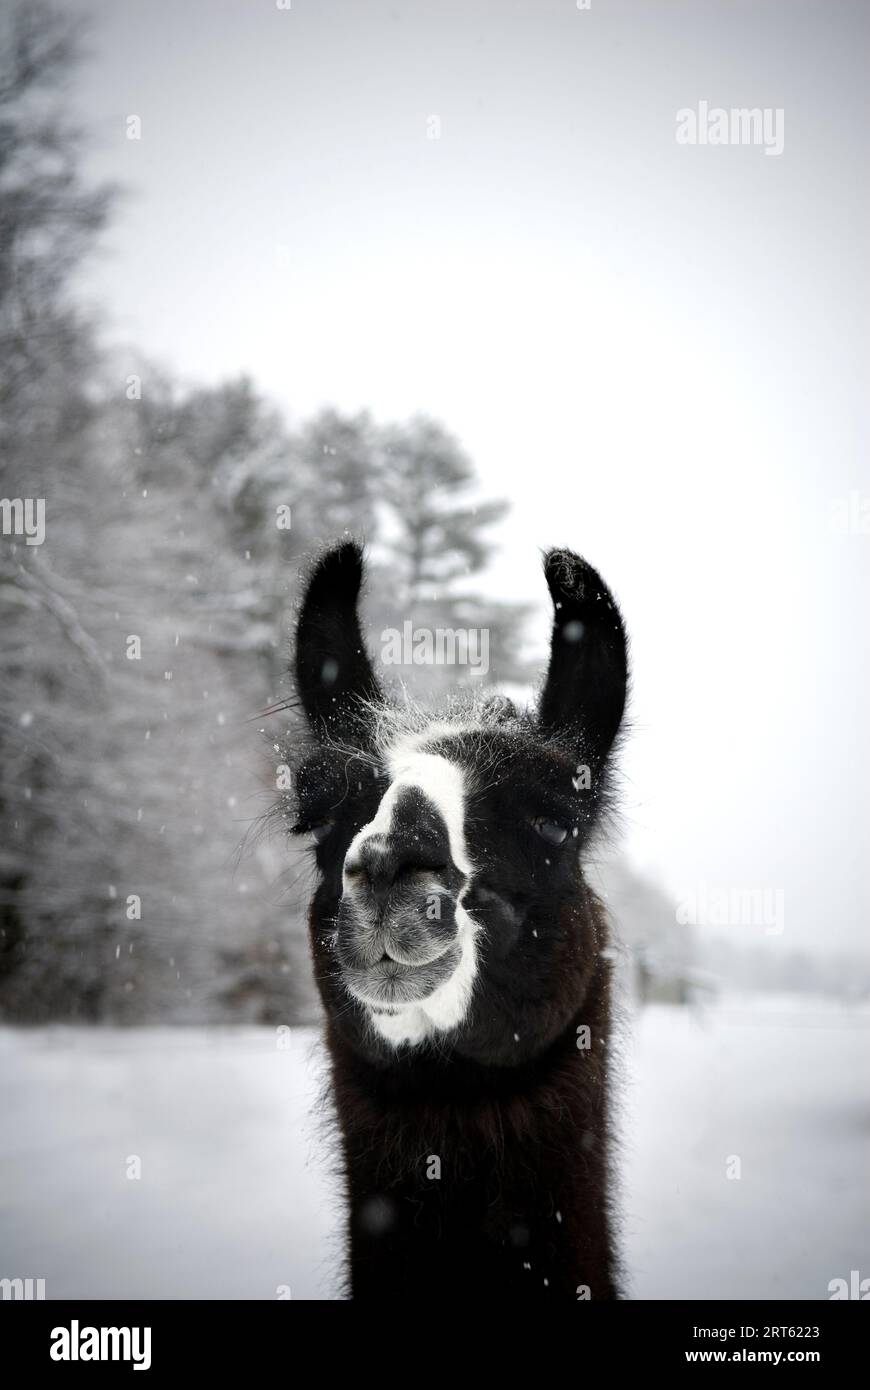 Llama standing in field during fresh snowfall, Maine, New England. Stock Photo